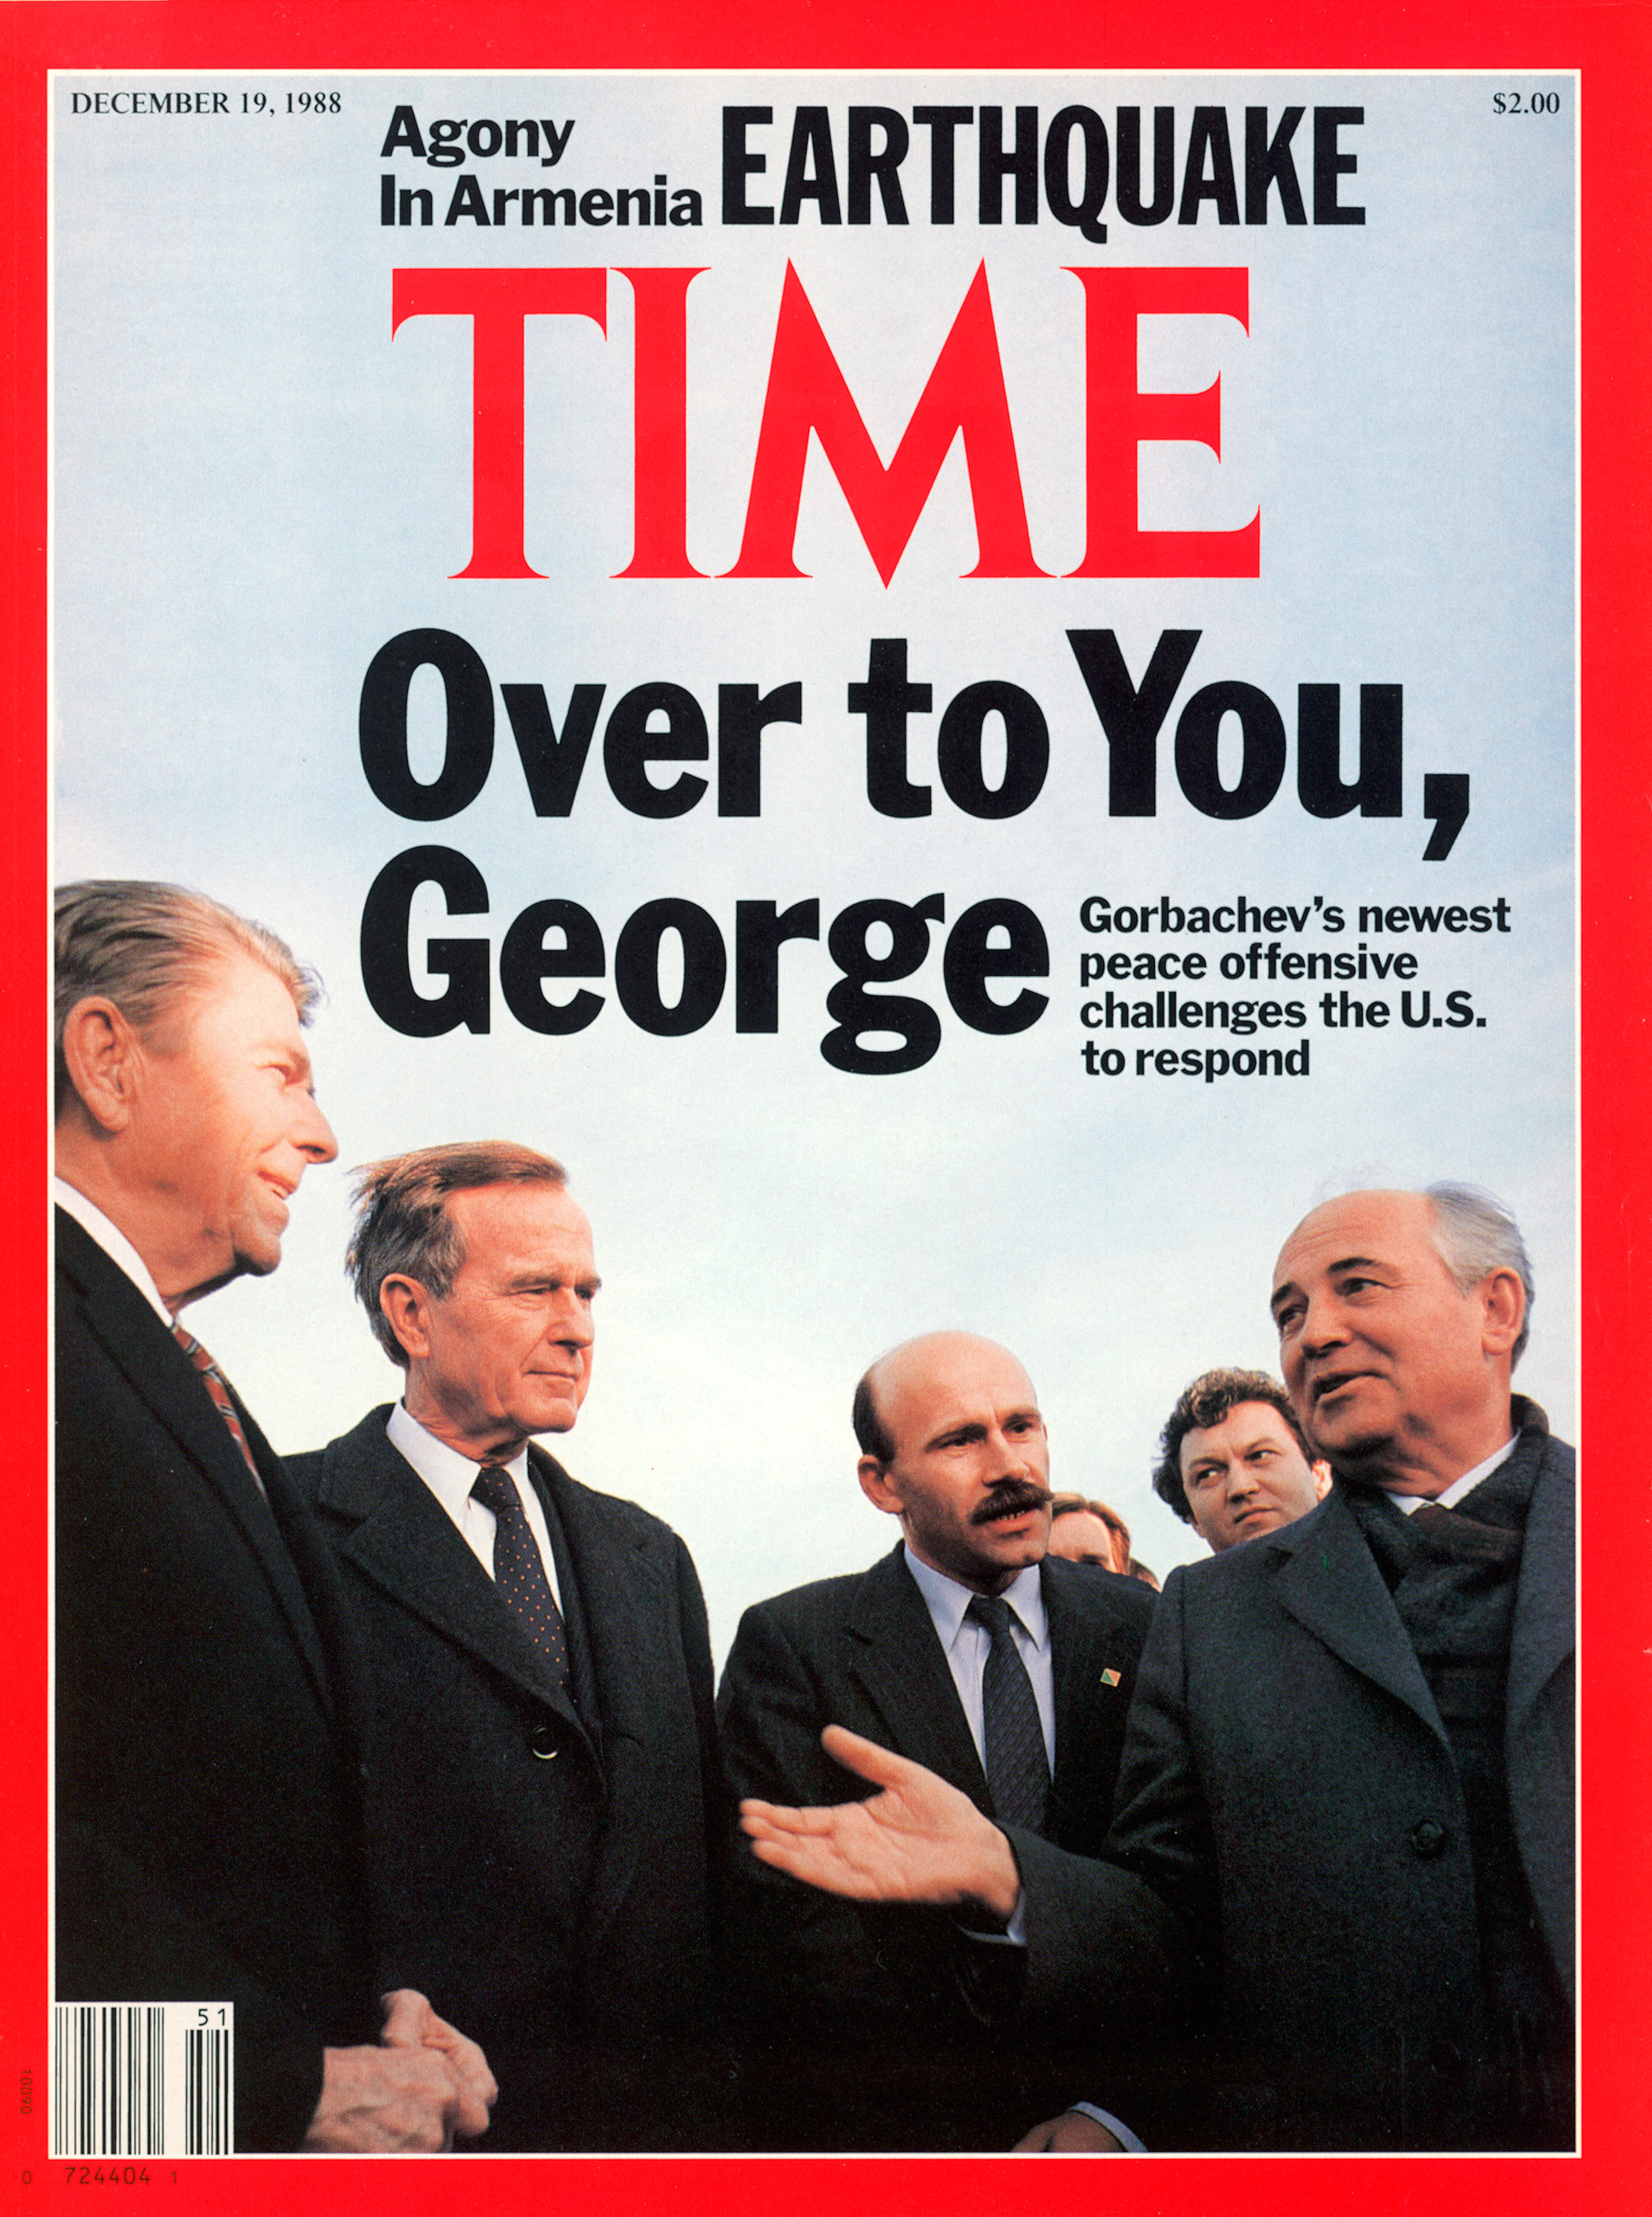 George H.W. Bush, with Ronald Reagan and Mikhail Gorbachev, on the Dec. 19, 1988, cover of TIME. Cover photo by Dirck Halstead.